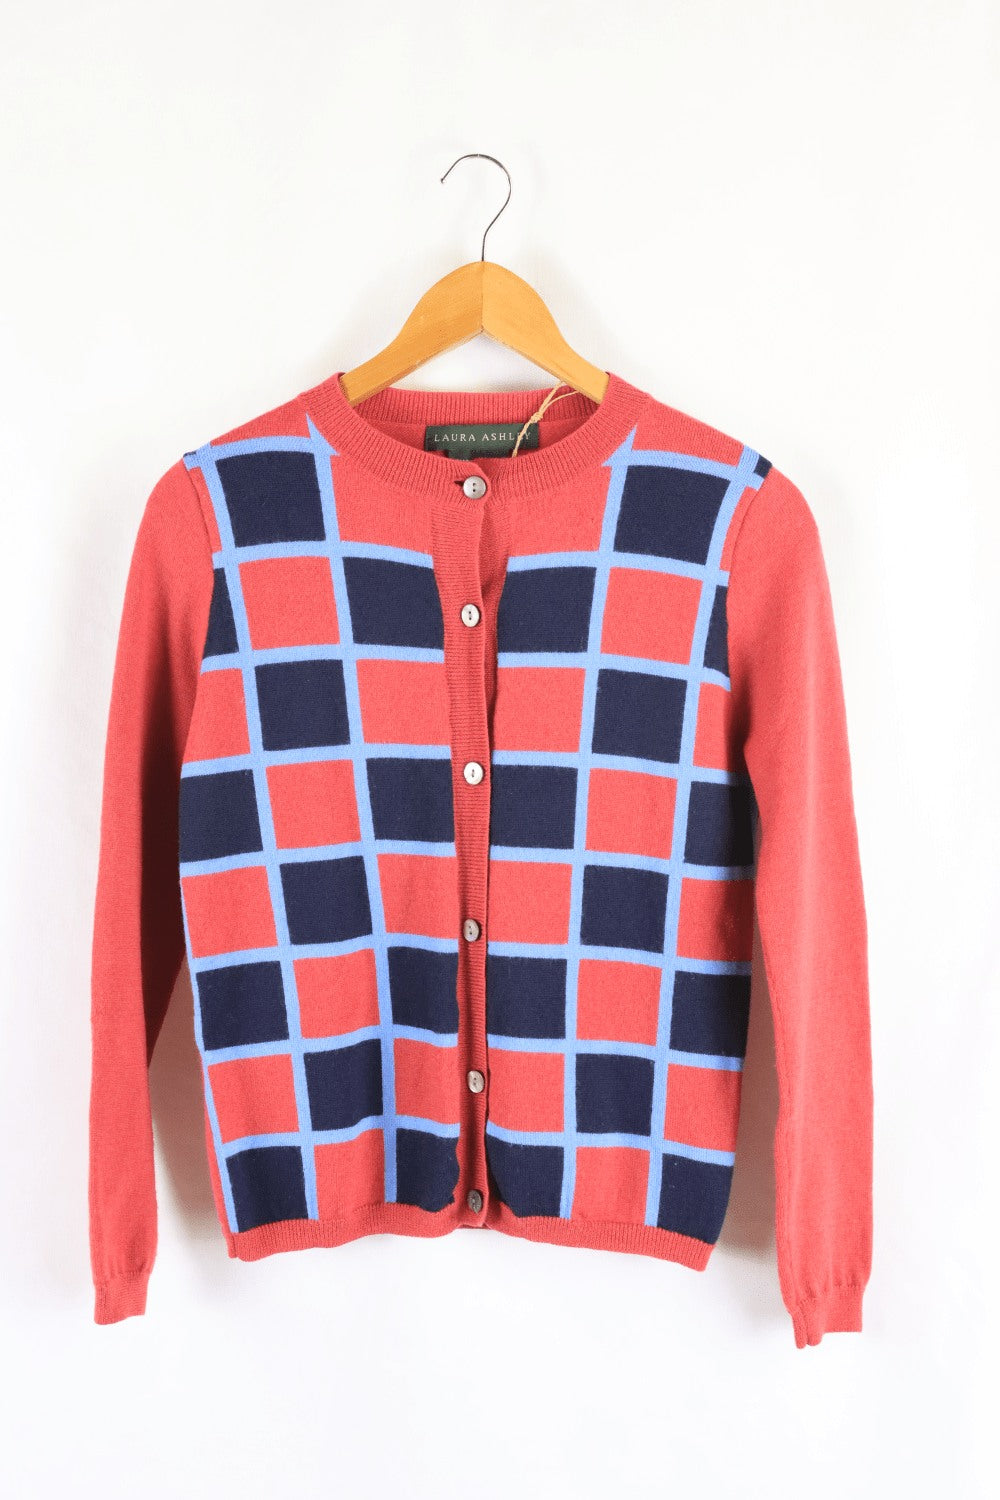 Laura Ashley Red And Blue Cardigan S